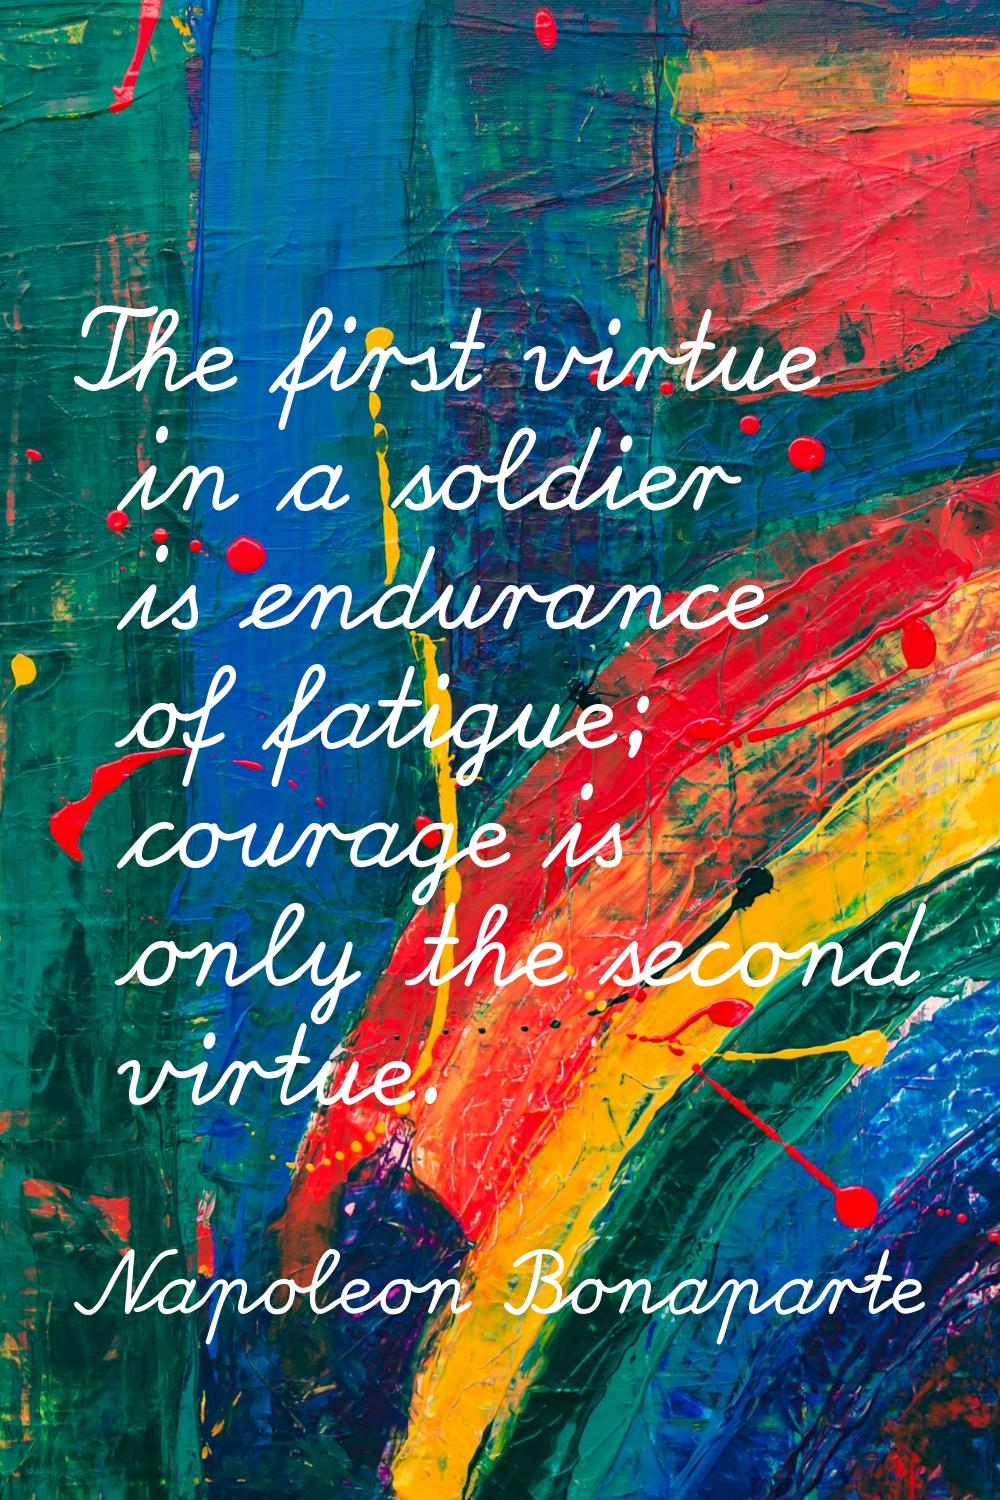 The first virtue in a soldier is endurance of fatigue; courage is only the second virtue.